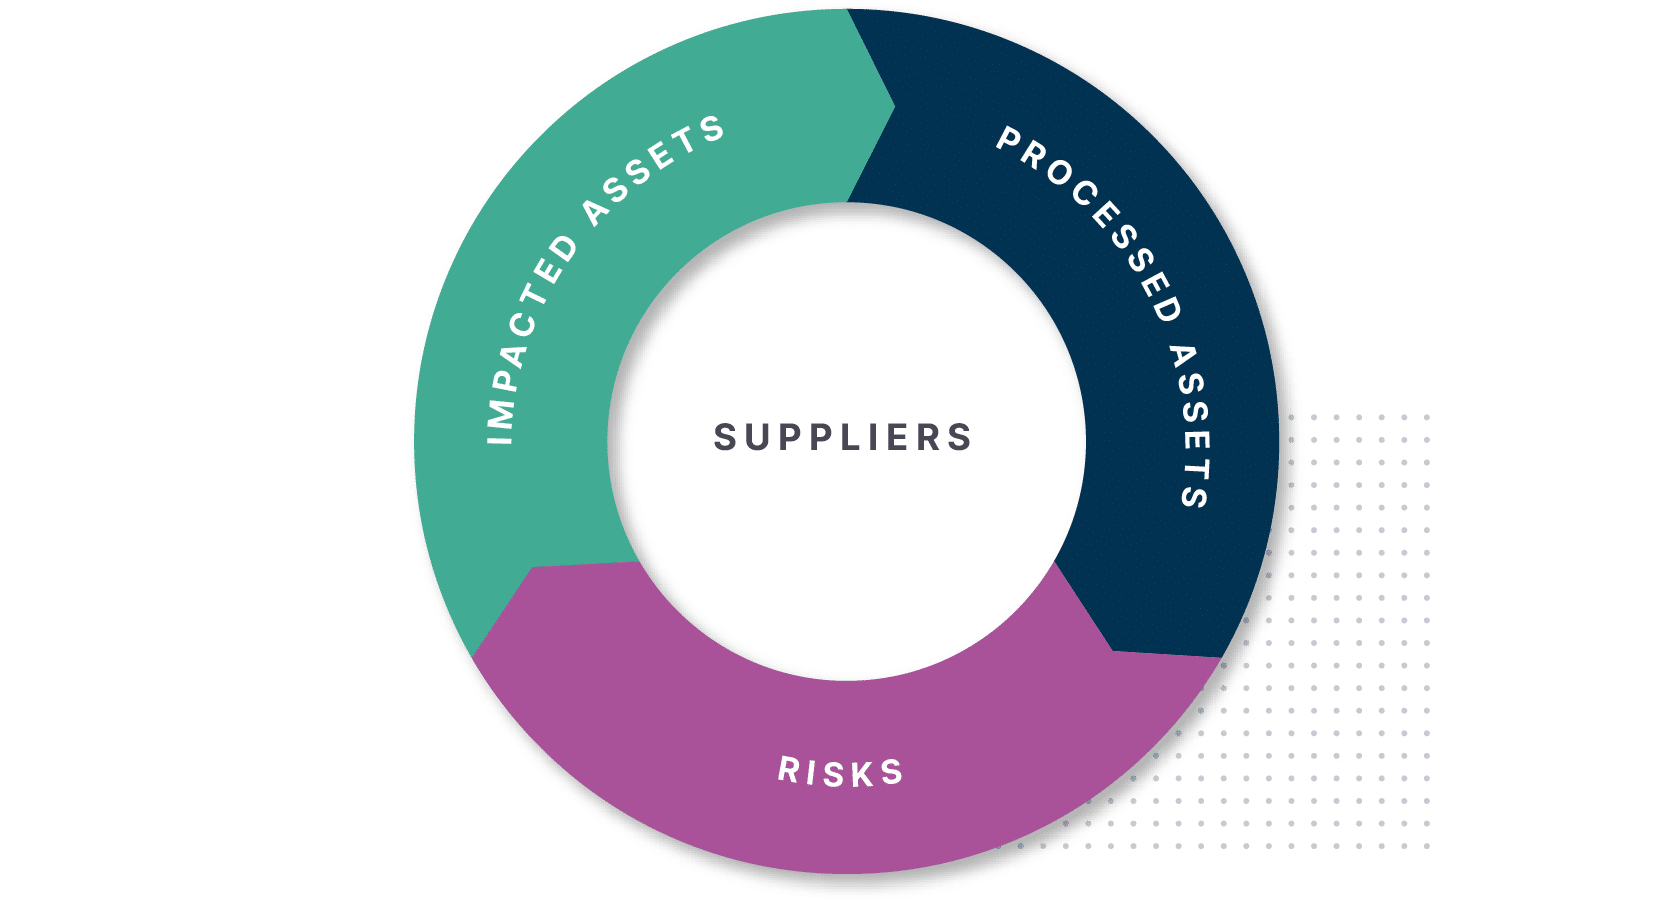 Create links between suppliers, risks, the assets they process and the assets they impact